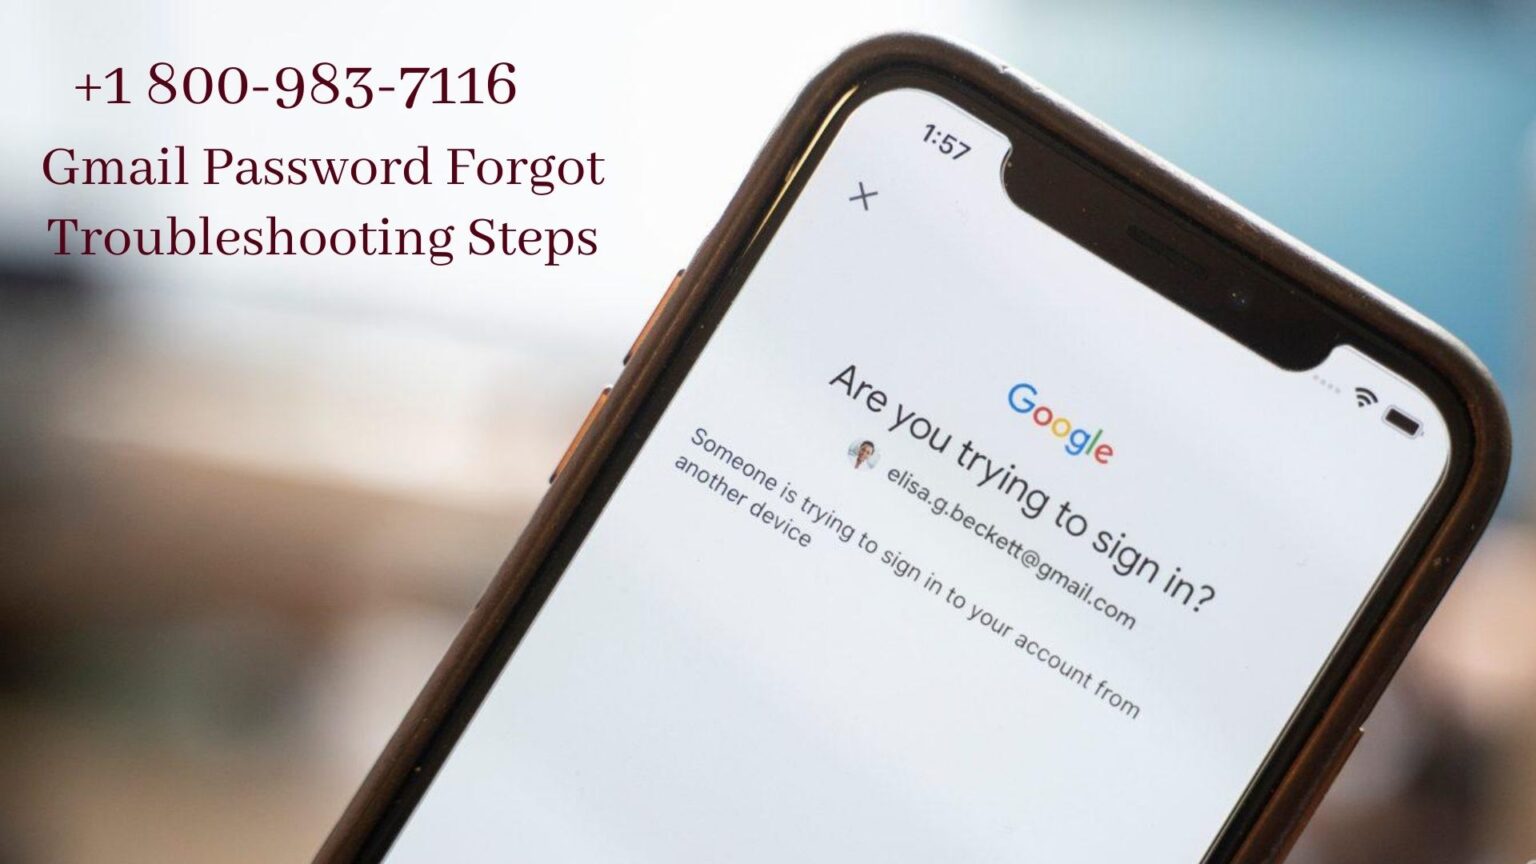 Tips to resolve Gmail Password Forgot | 18009837116